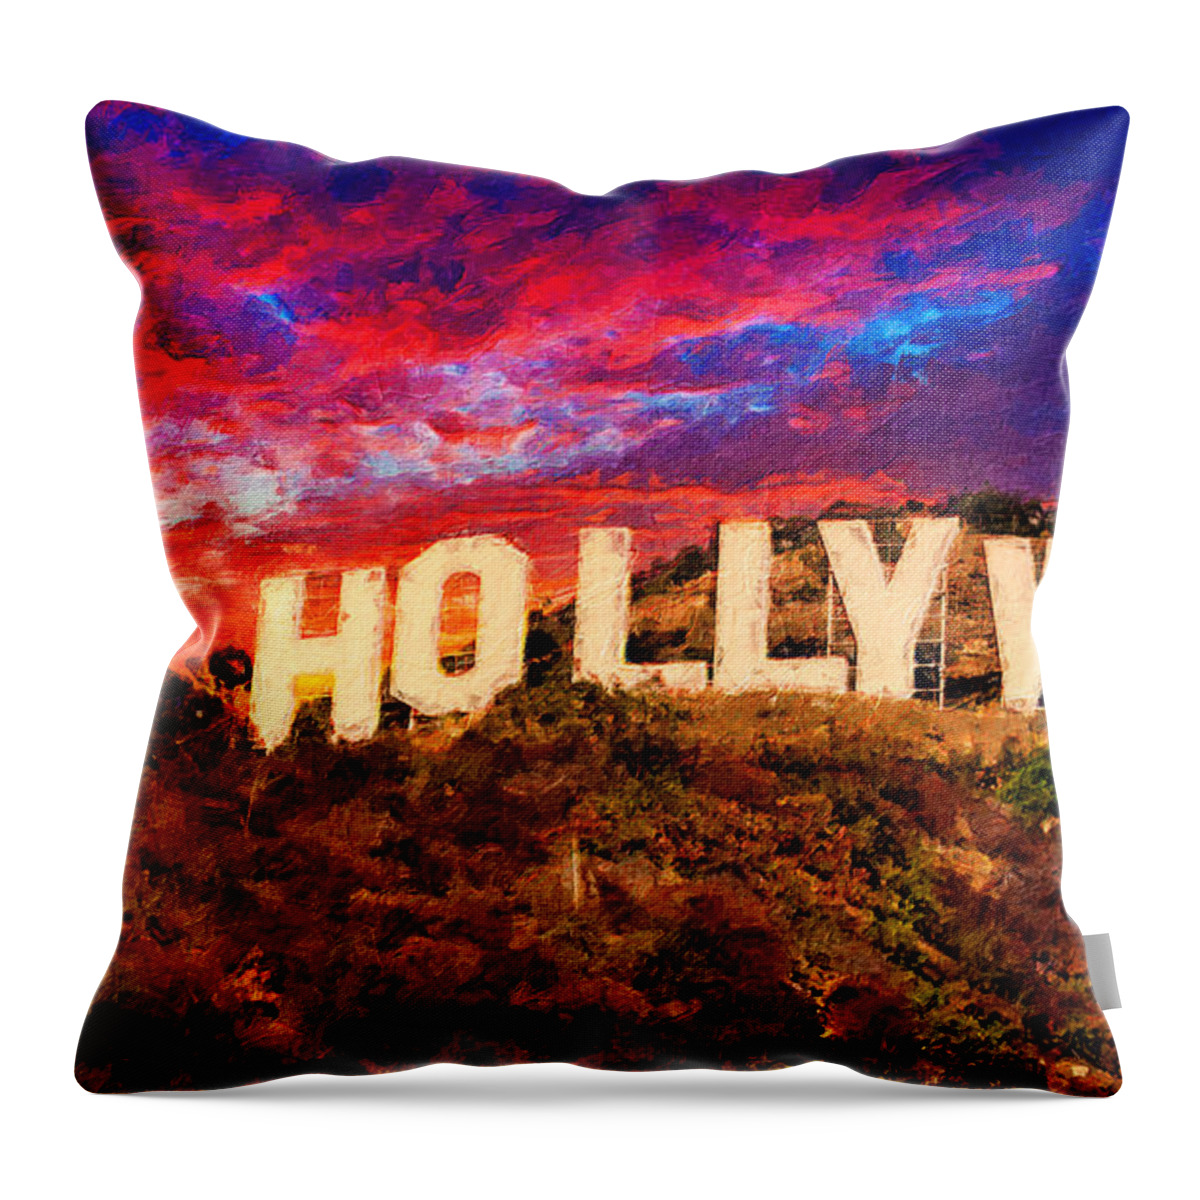 Hollywood Throw Pillow featuring the digital art Hollywood sign in the sunset light with a dramatic sky - digital painting by Nicko Prints